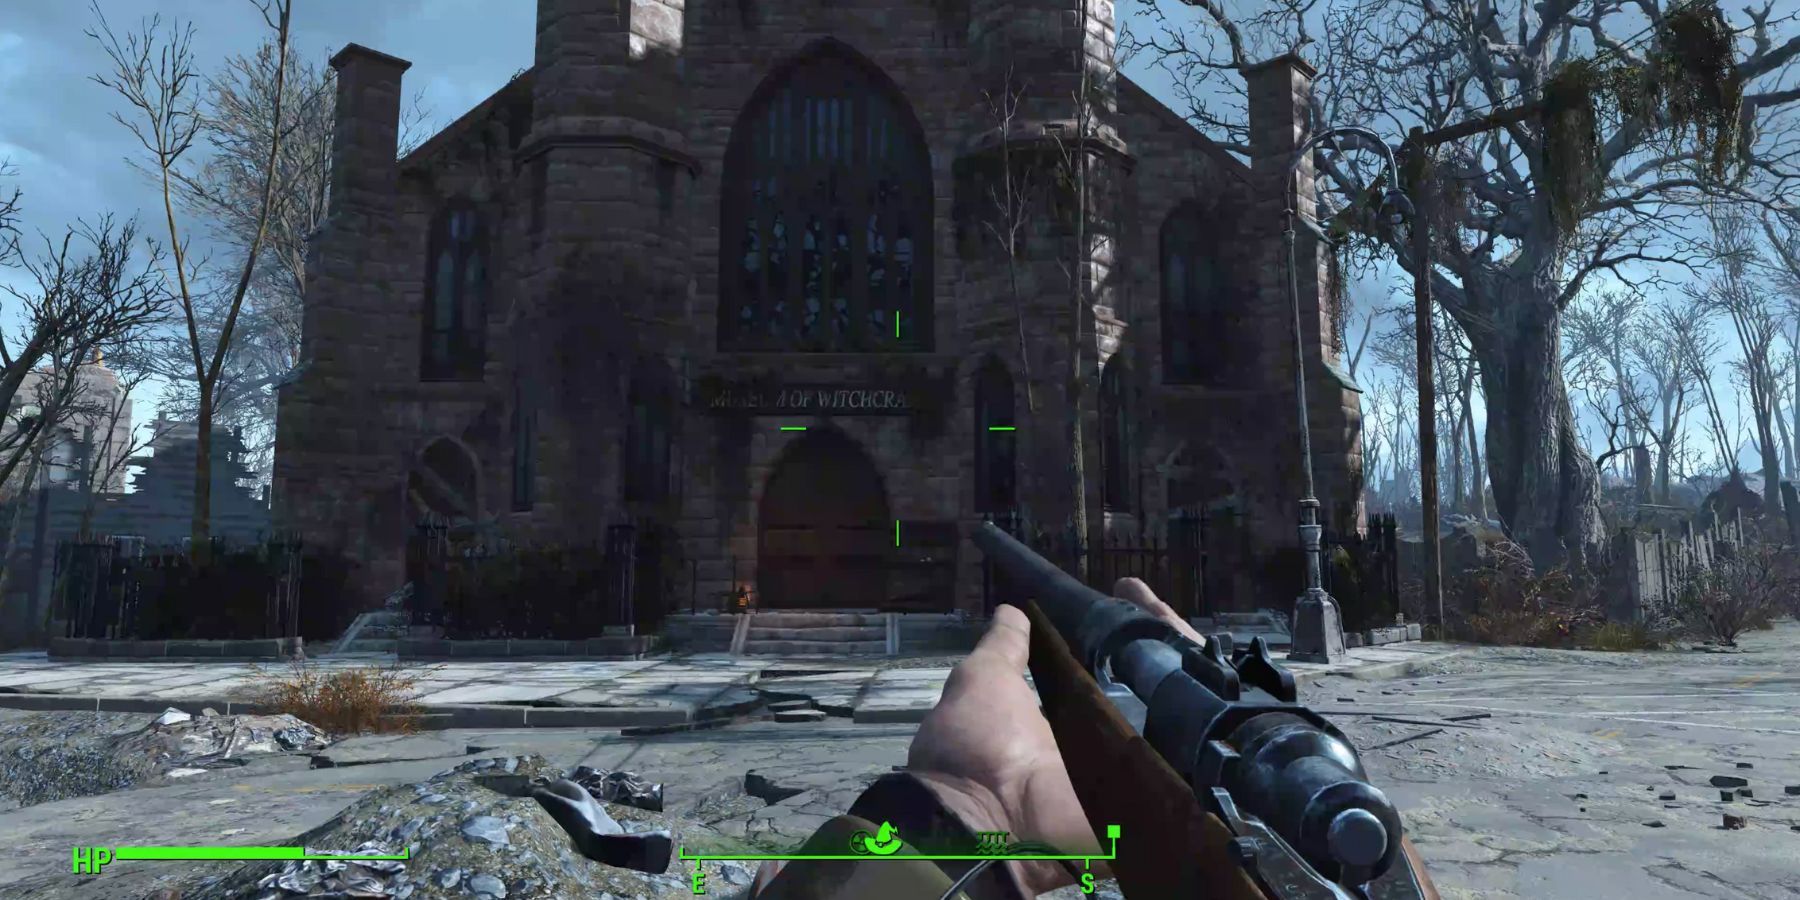 Aiming a rifle at the Museum of Witchcraft in Fallout 4